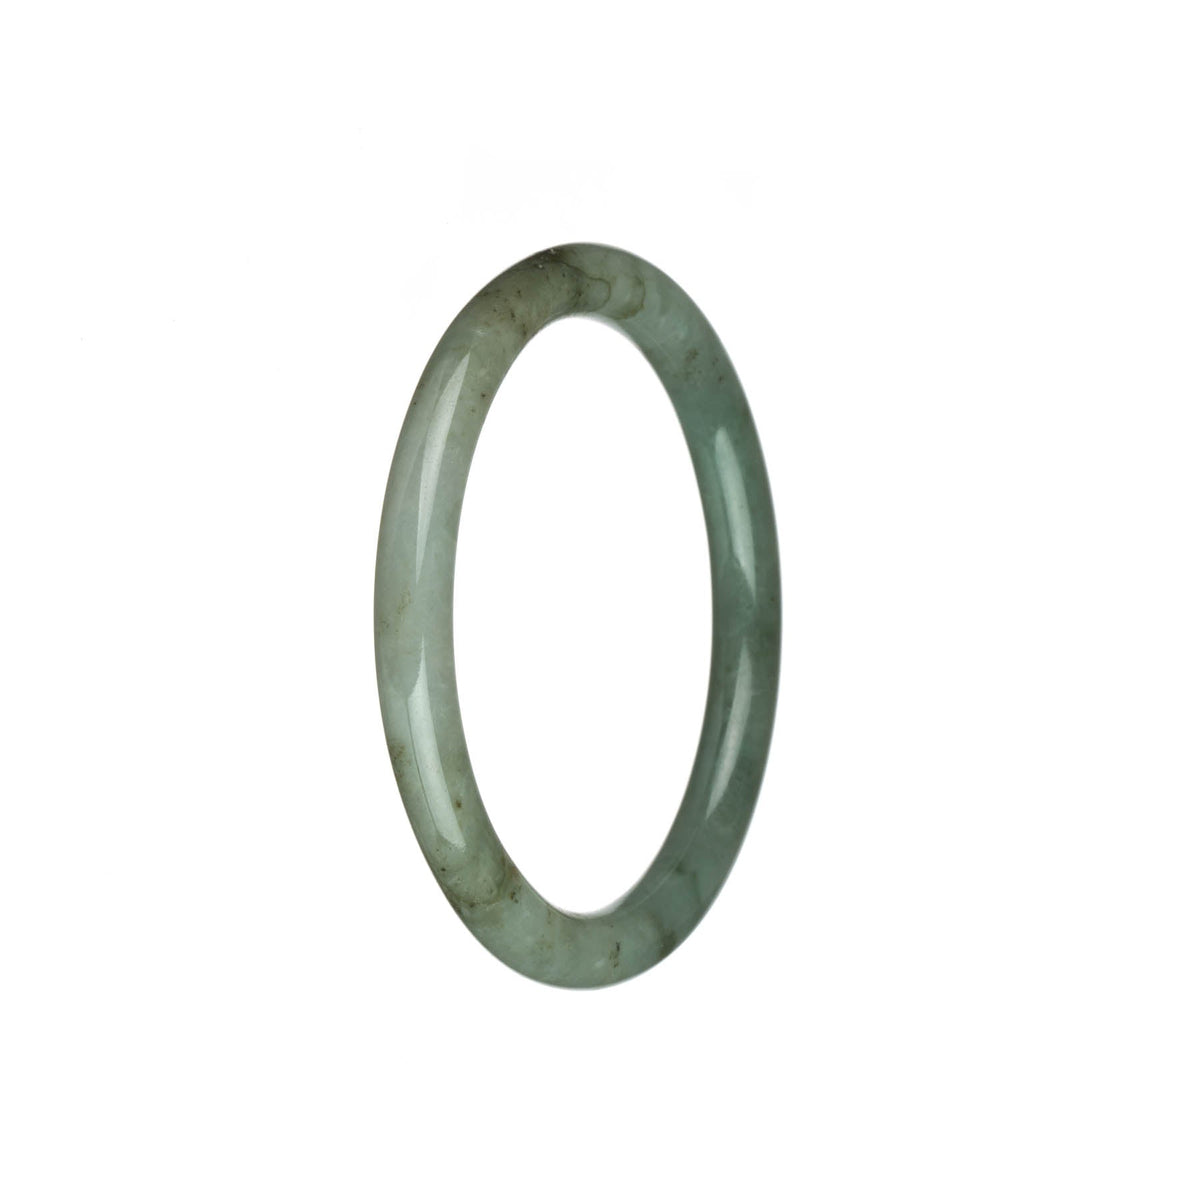 An elegant jade bracelet made from real natural green and pale green jadeite. The bracelet features petite round beads measuring 57mm in diameter. Designed by MAYS.